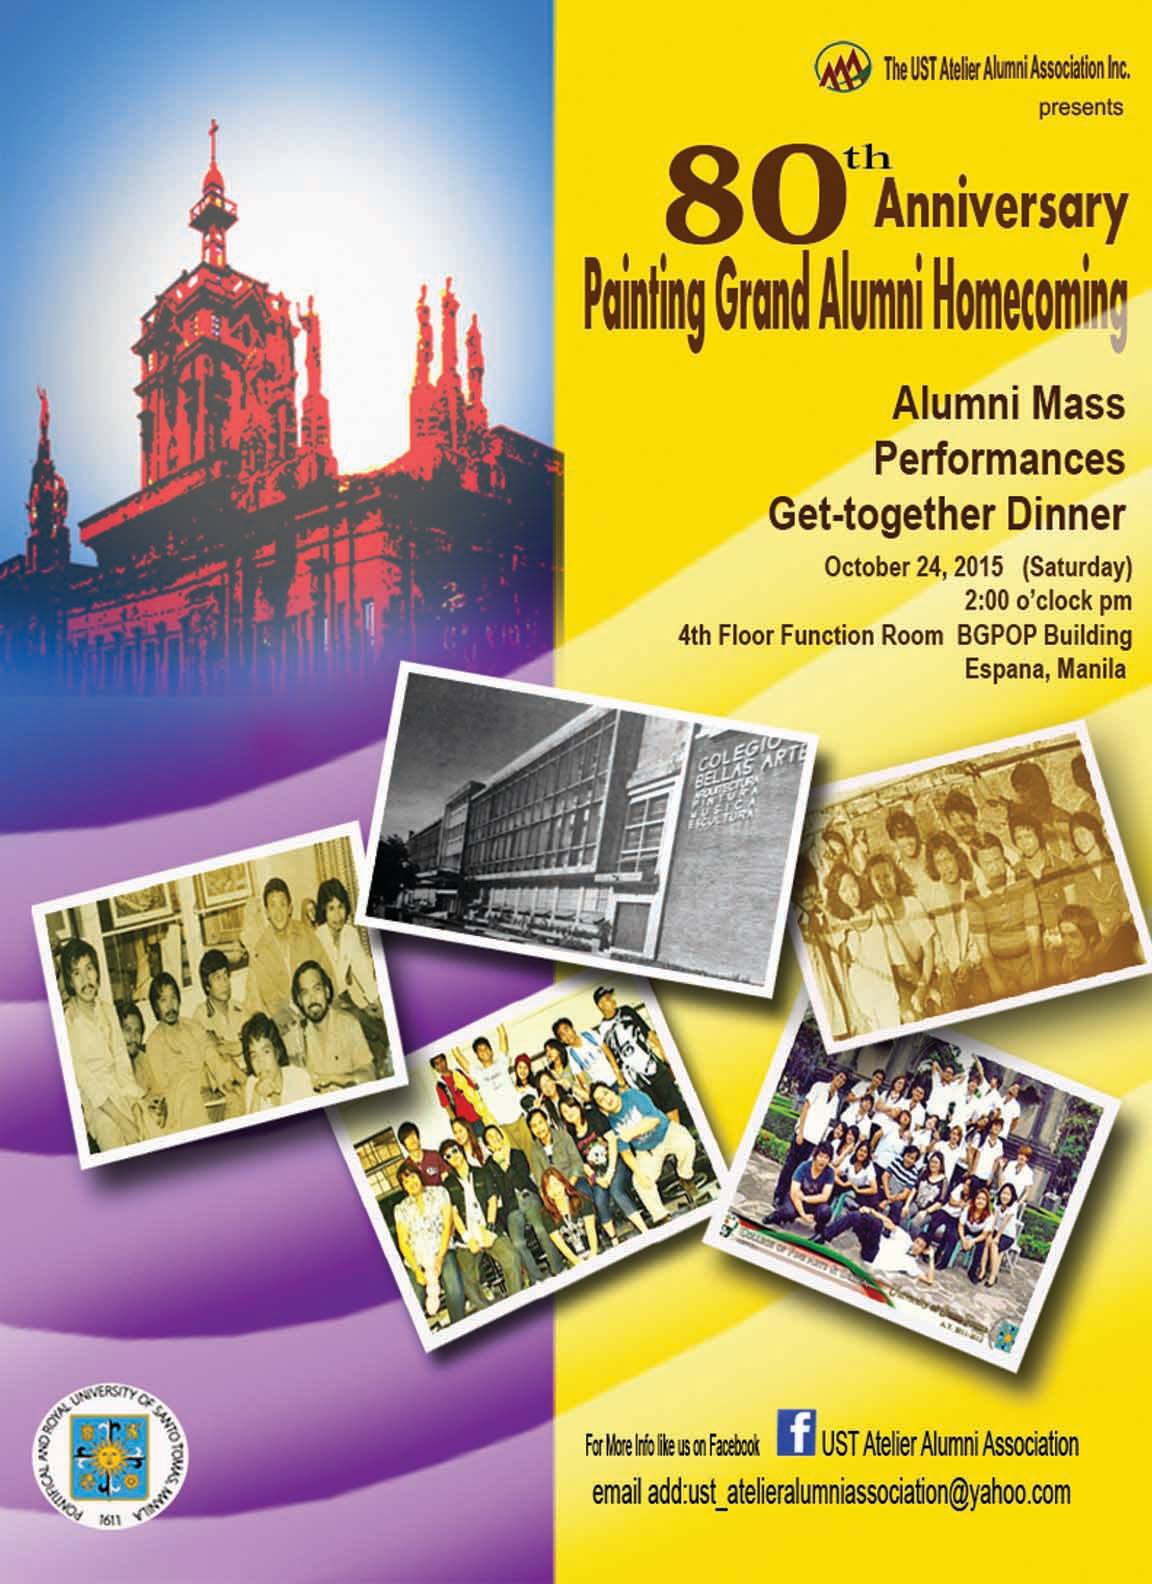 80th Anniversary Painting Alumni Grand Homecoming Saturday, October 24 at 2:00pm Next Week 4th Floor Function Rm., Thomasian Alumni Center, BGPOP Bldg. (former gym) Invited by Tracy Poblete Registration Fee: P1,500 (dinner included) Guest of Alumni: P500/person 1)Please submit 2x2 ID picture upon registration. 2)Please bring a Painting for the Raffle ( minimum size 16"x20") For Early Registartion please deposit to: BPI UST Atelier Alumni Association, Inc. SA # 0063-3287-82 * Note: Email deposit slip to ust_atelieralumniasociation@yahoo.com For inquires: Ana Rhea Consebido-Adonis - 0916-6250158 Guia Sarte - 0928-5548436 ----- Attention: To Painting Alumni, You are all invited to attend the 80th Anniversary Painting Alumni Grand Homecoming on October 24, 2015 (Saturday) 2:00PM at the 4th Floor Function Rm. UST Thomasian Alumni Center, BGPOP Bldg.(former gym) Registration Fee: Php1,500 (dinner included)